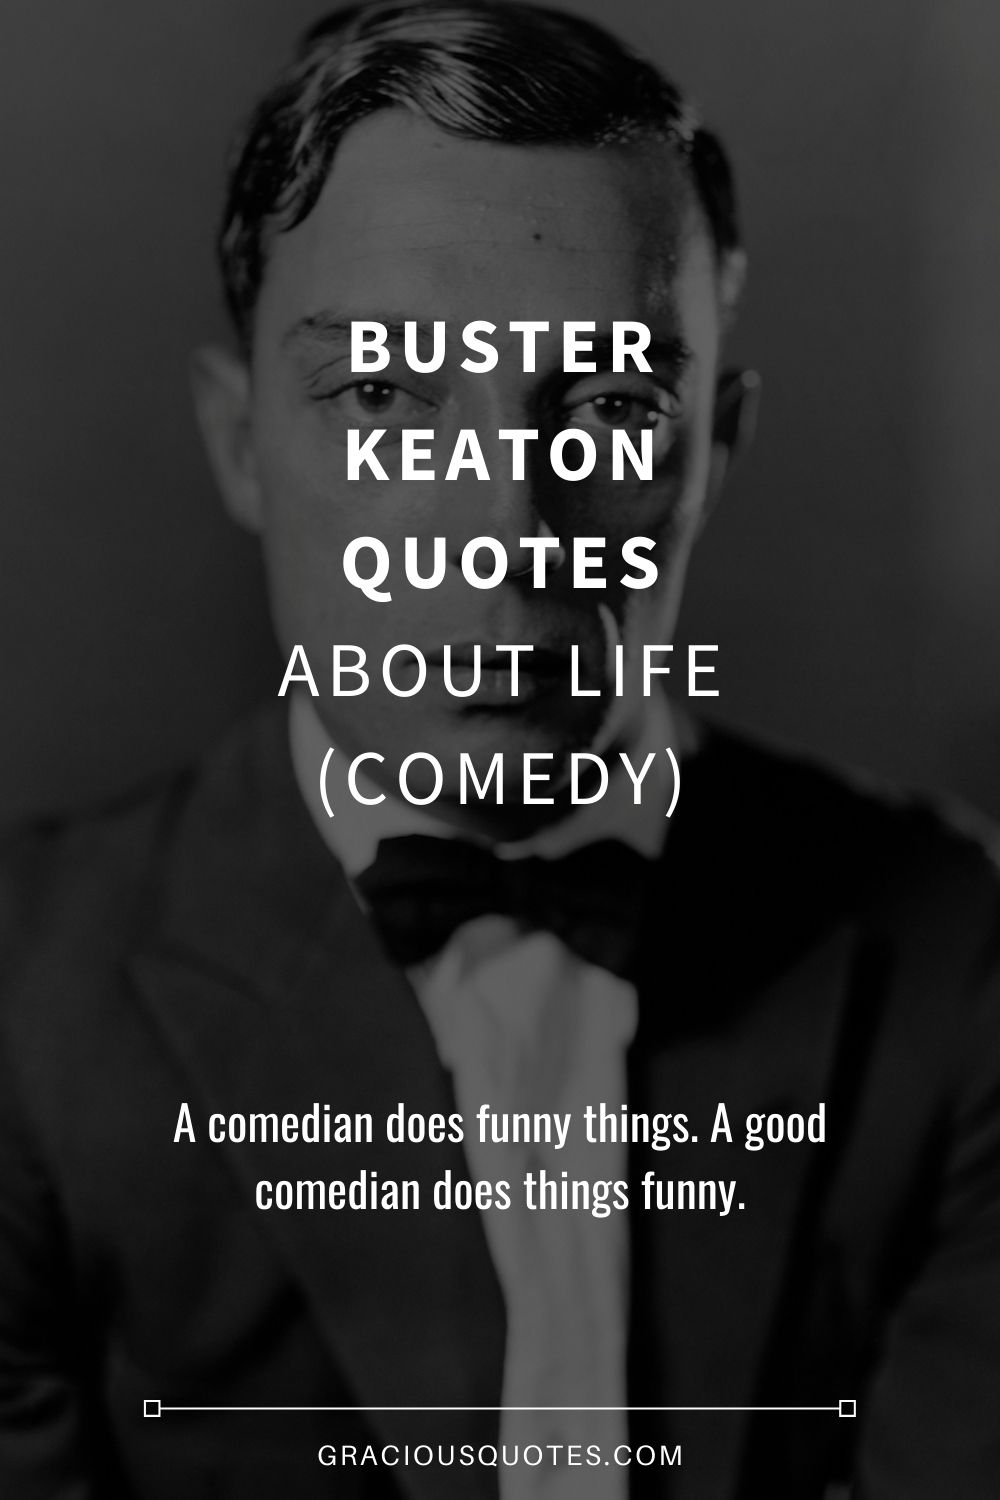 Top 12 Buster Keaton Quotes About Life (COMEDY)